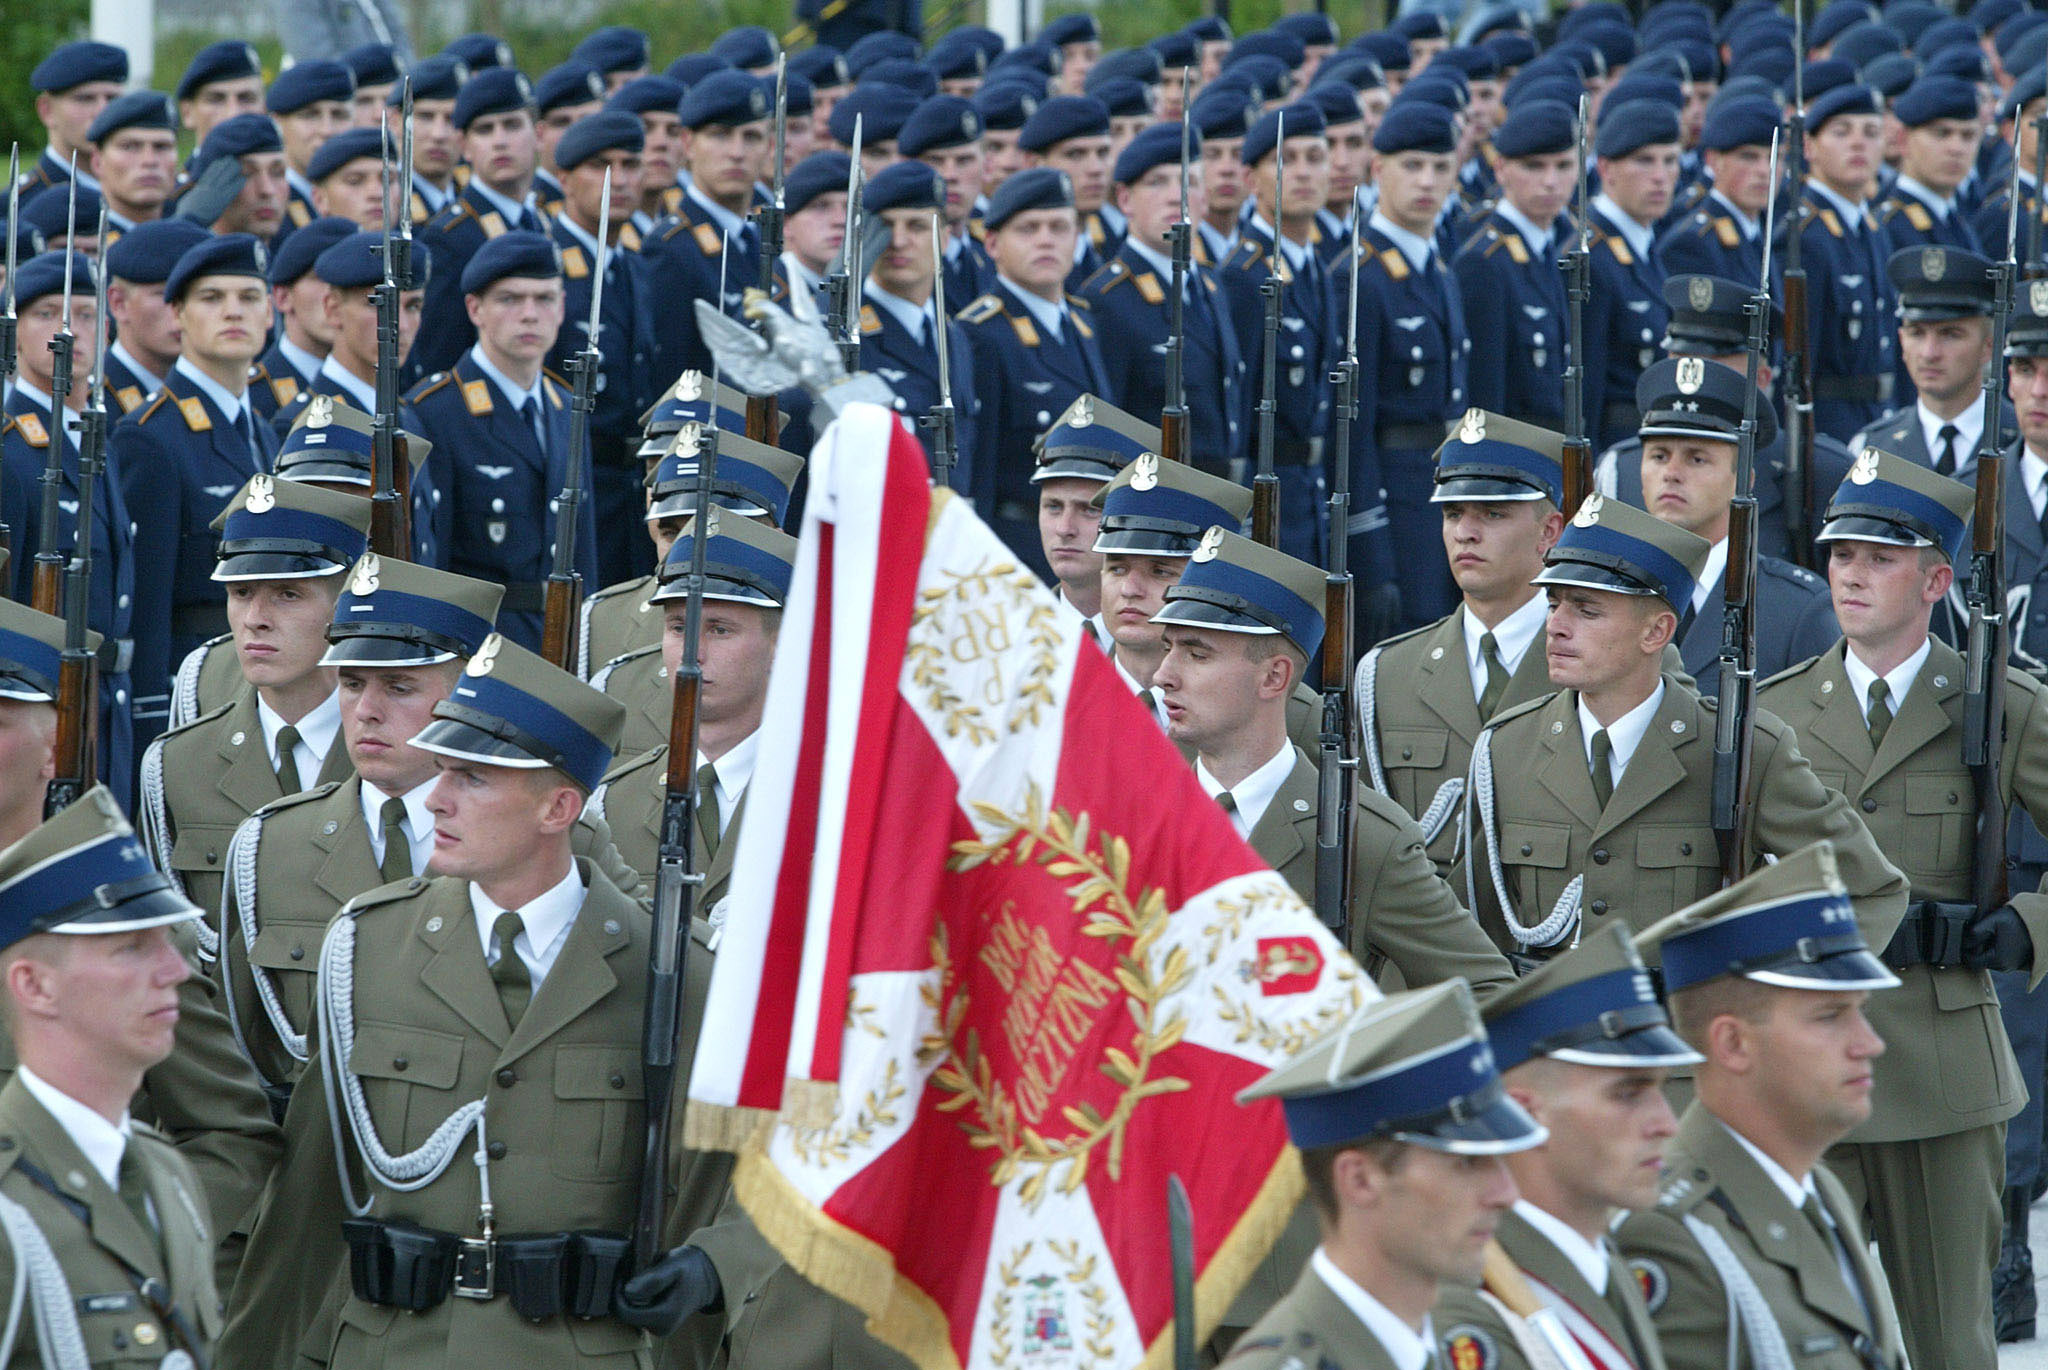 THE POLISH GUARD OF HONOUR MARCHES IN FRONT OF GERMAN SOLDIERS DURINGTHE CEREMONY IN BERLIN.